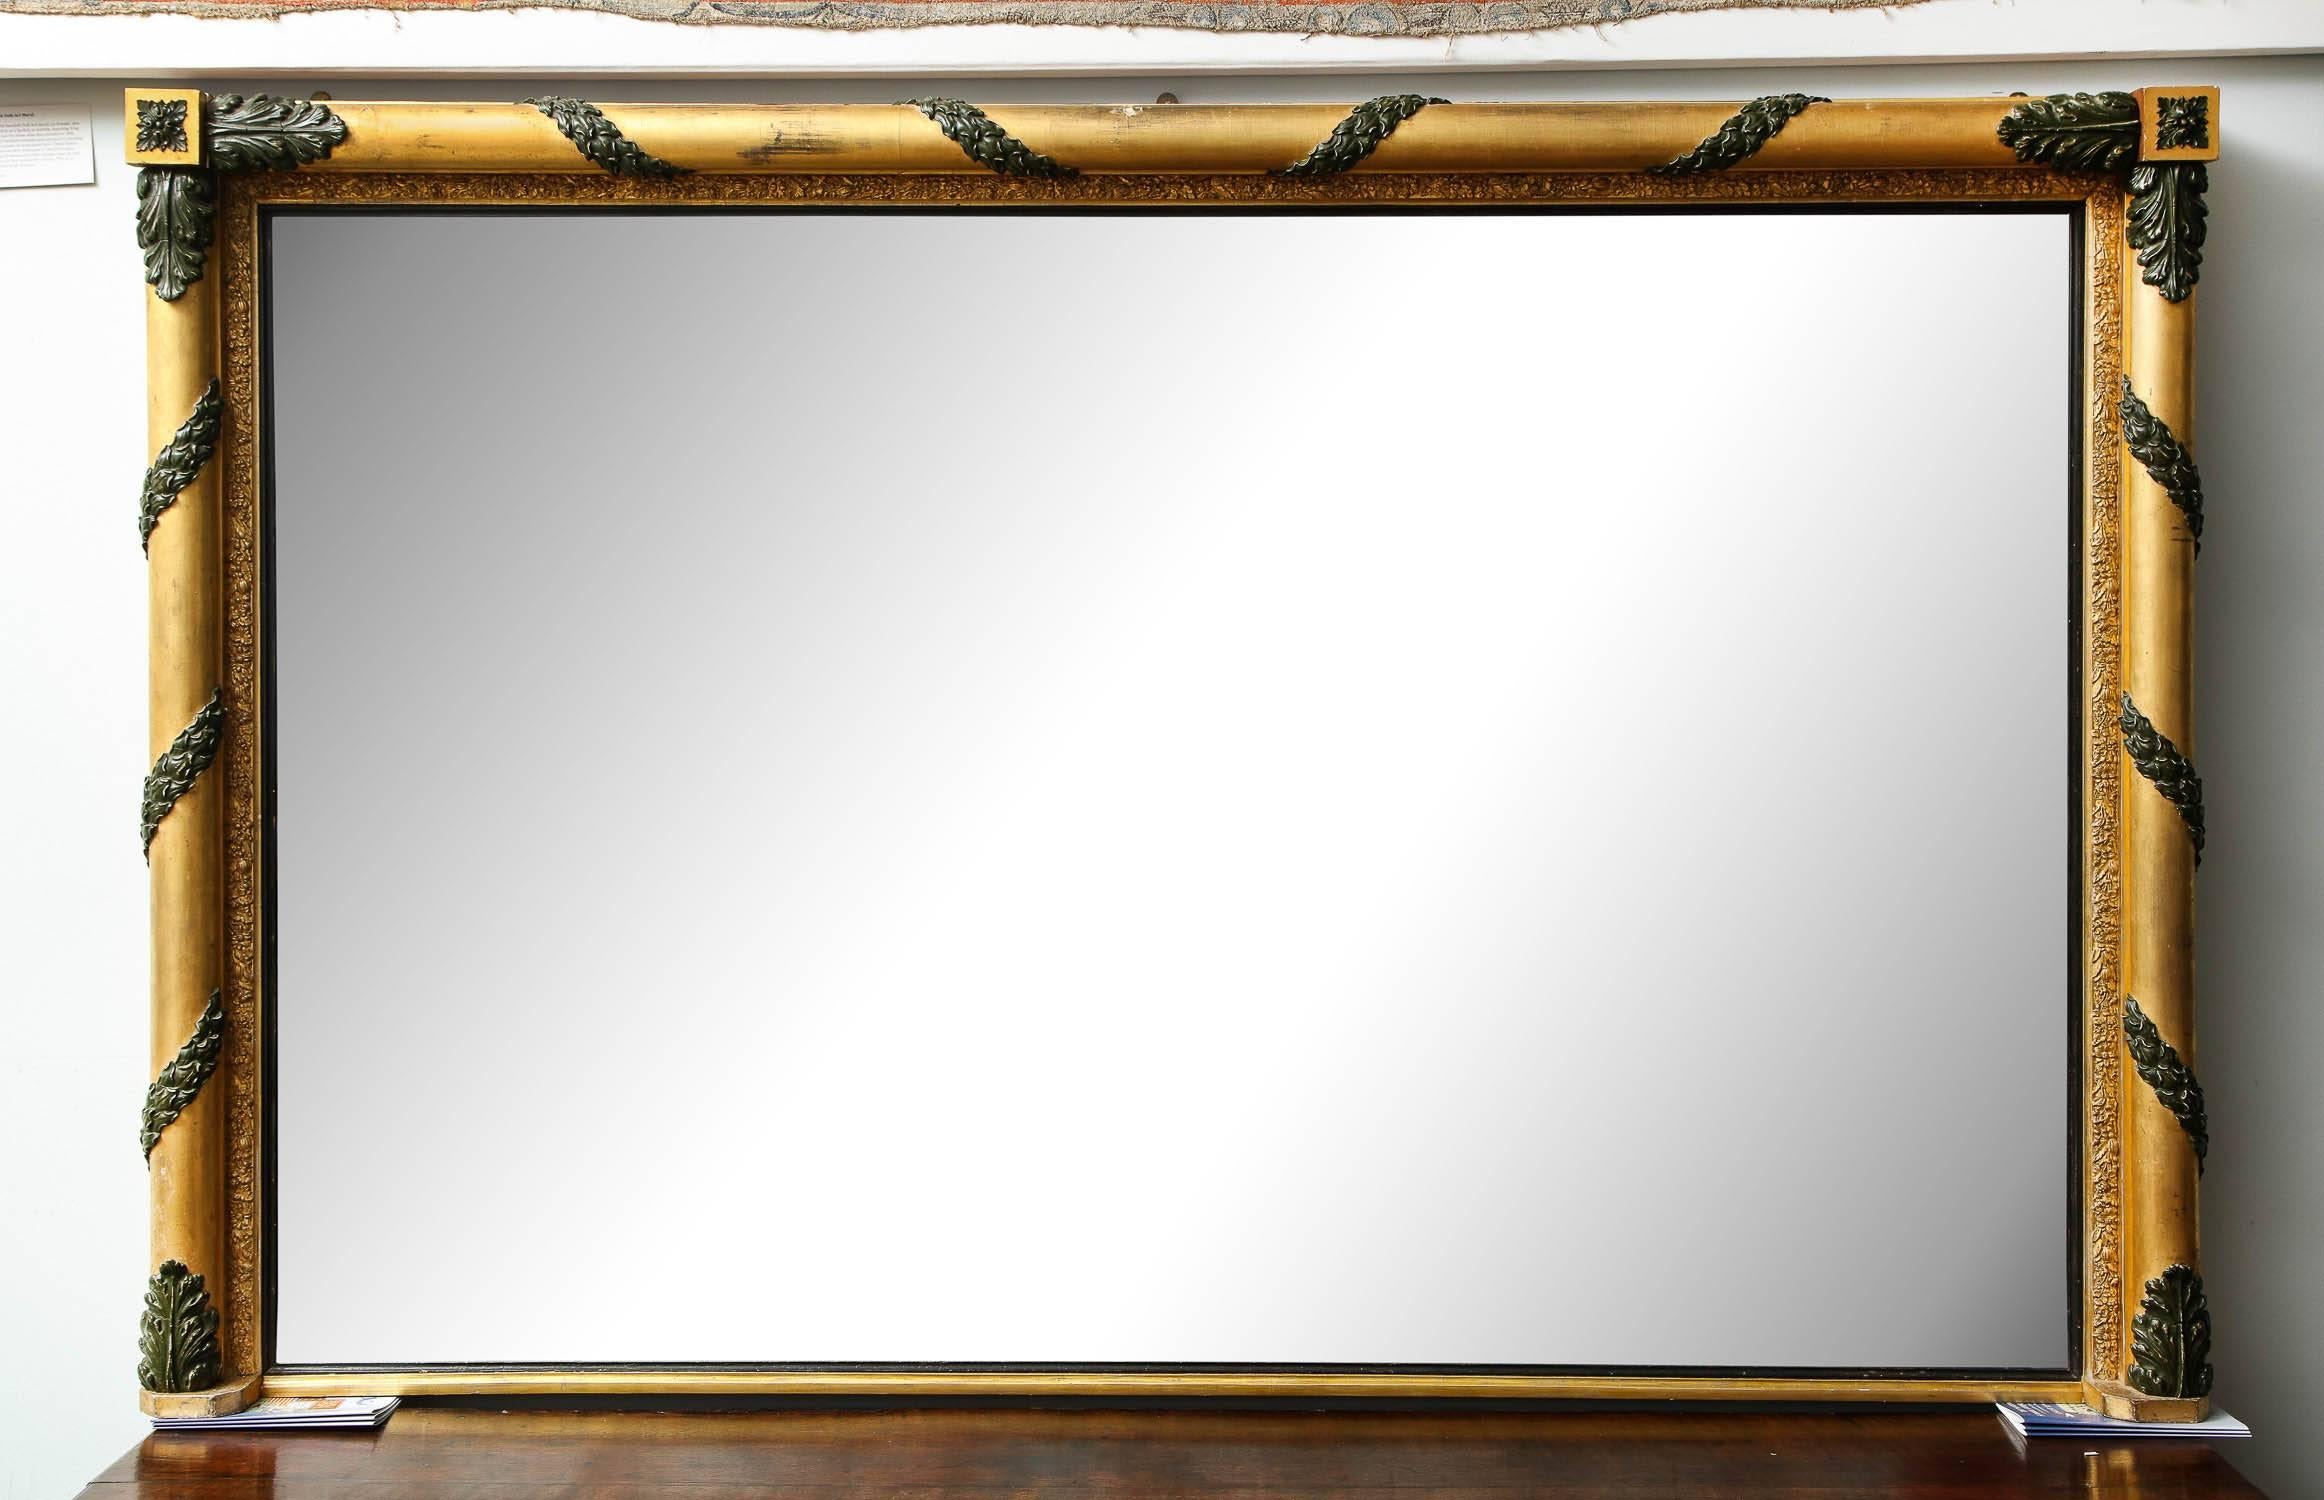 Very large early 19th century English gilt and painted wood overmantel mirror with carved acanthus leaf carved caps on the ends of the smooth gilt columns, the inner and outer border with gilt composition decoration, retaining its original mercury